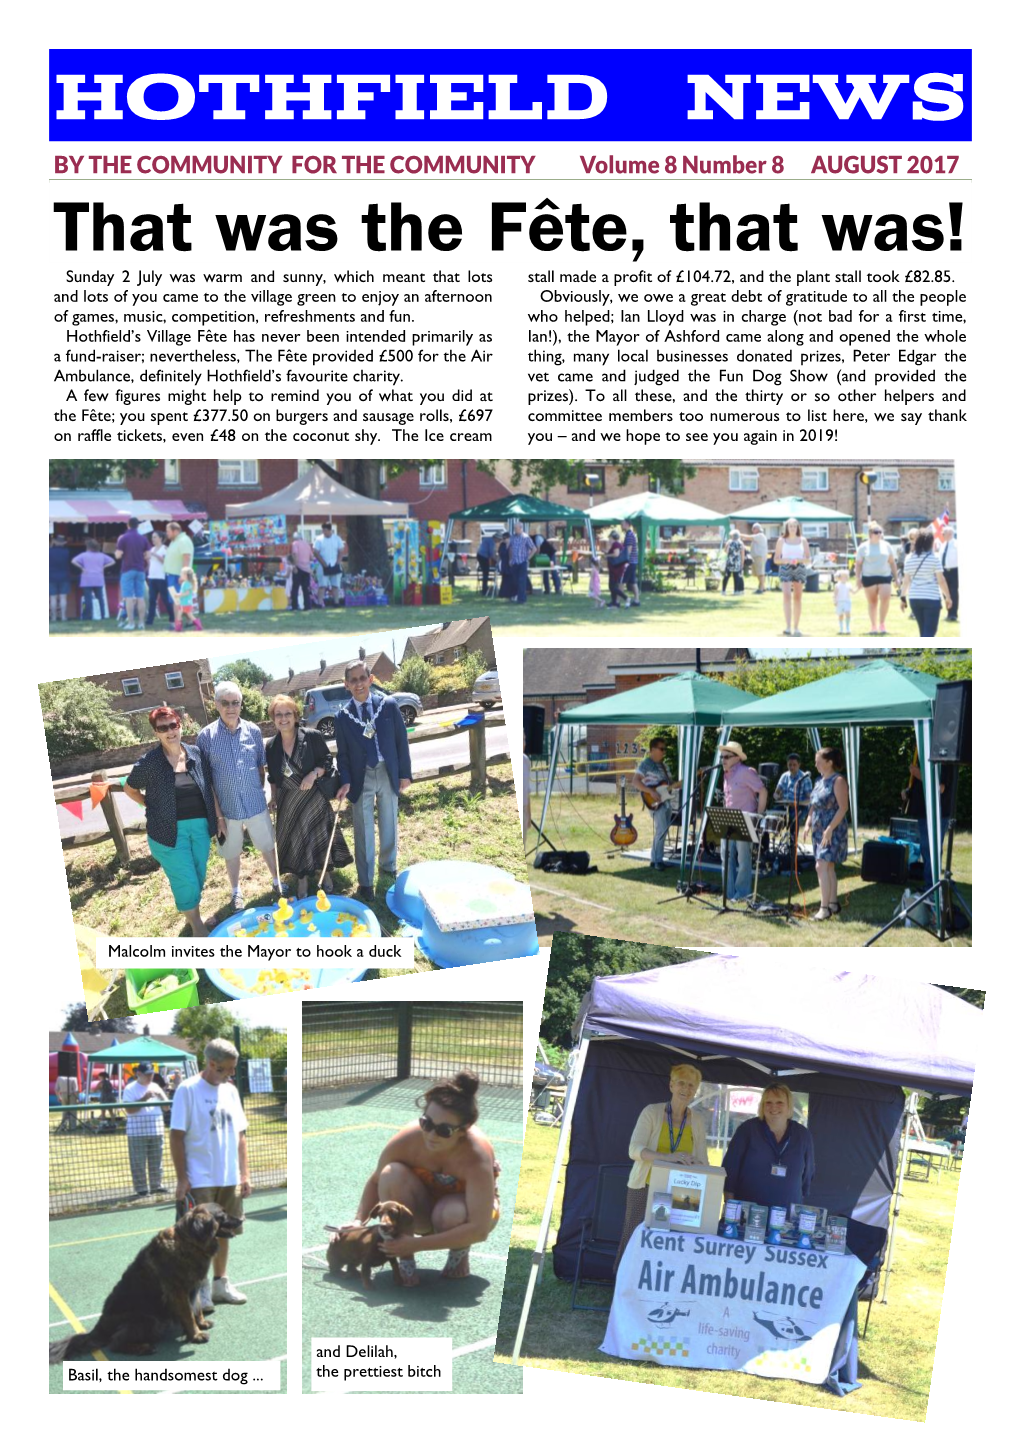 HOTHFIELD NEWS That Was the Fête, That Was!